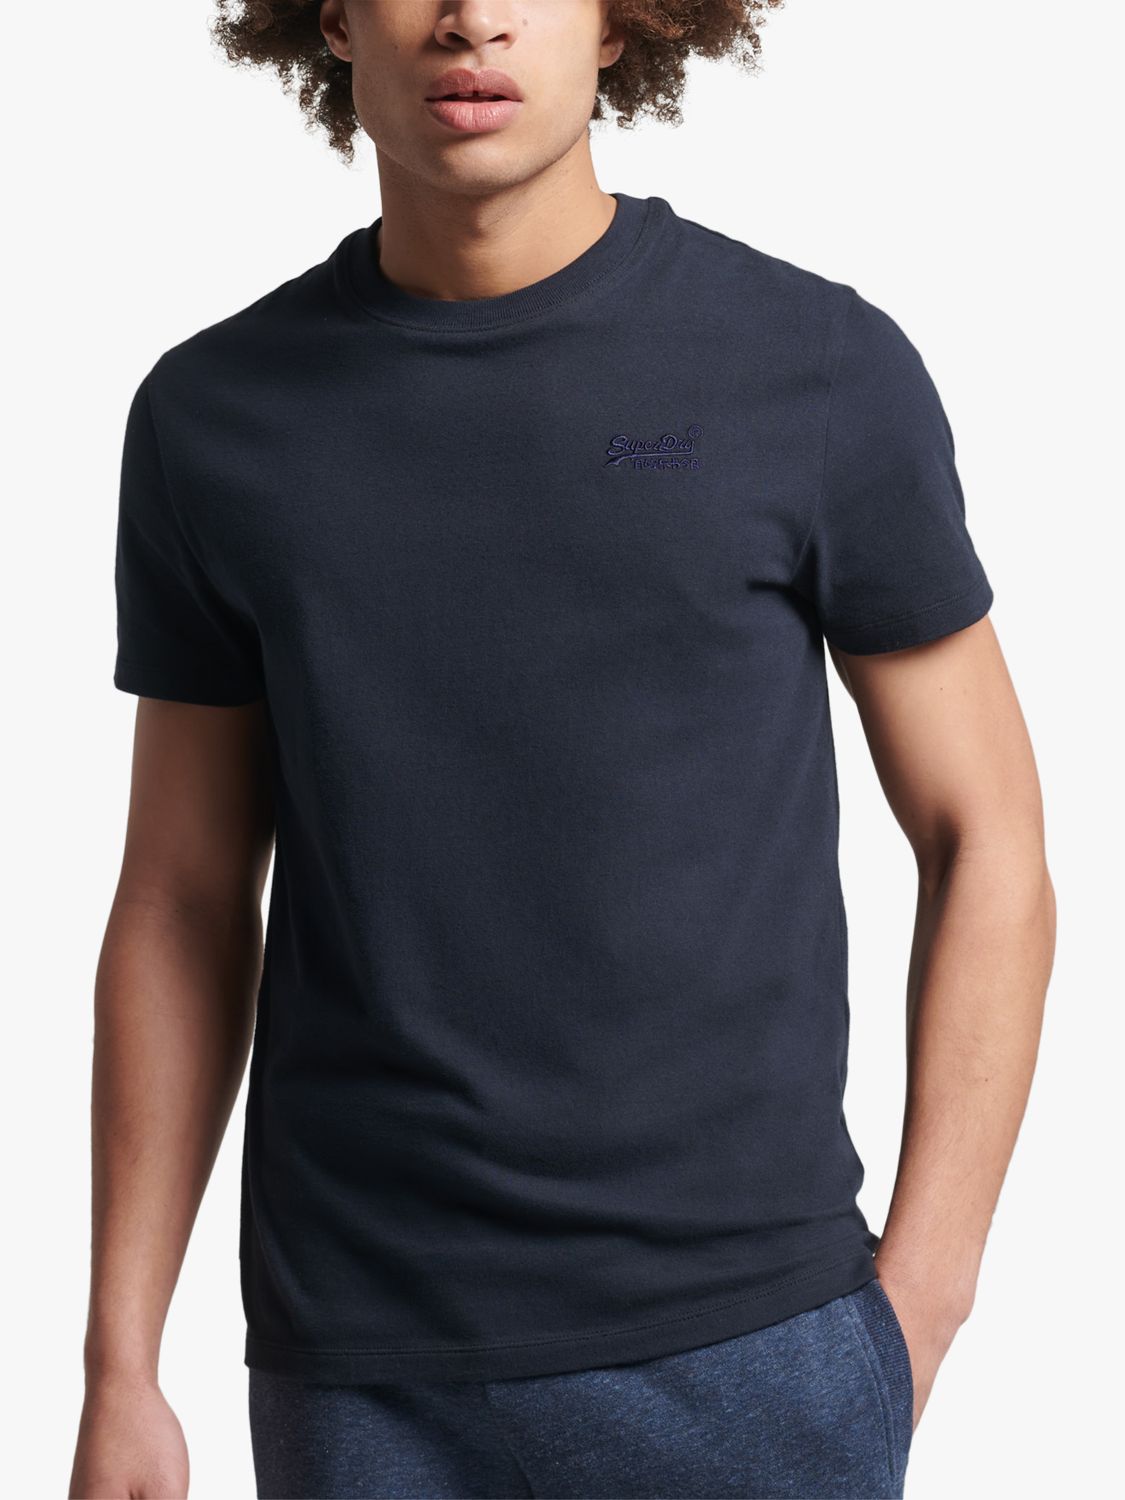 Superdry Organic John T-Shirt, Lewis Vintage Embroidered Navy Partners at Eclipse & Logo Cotton